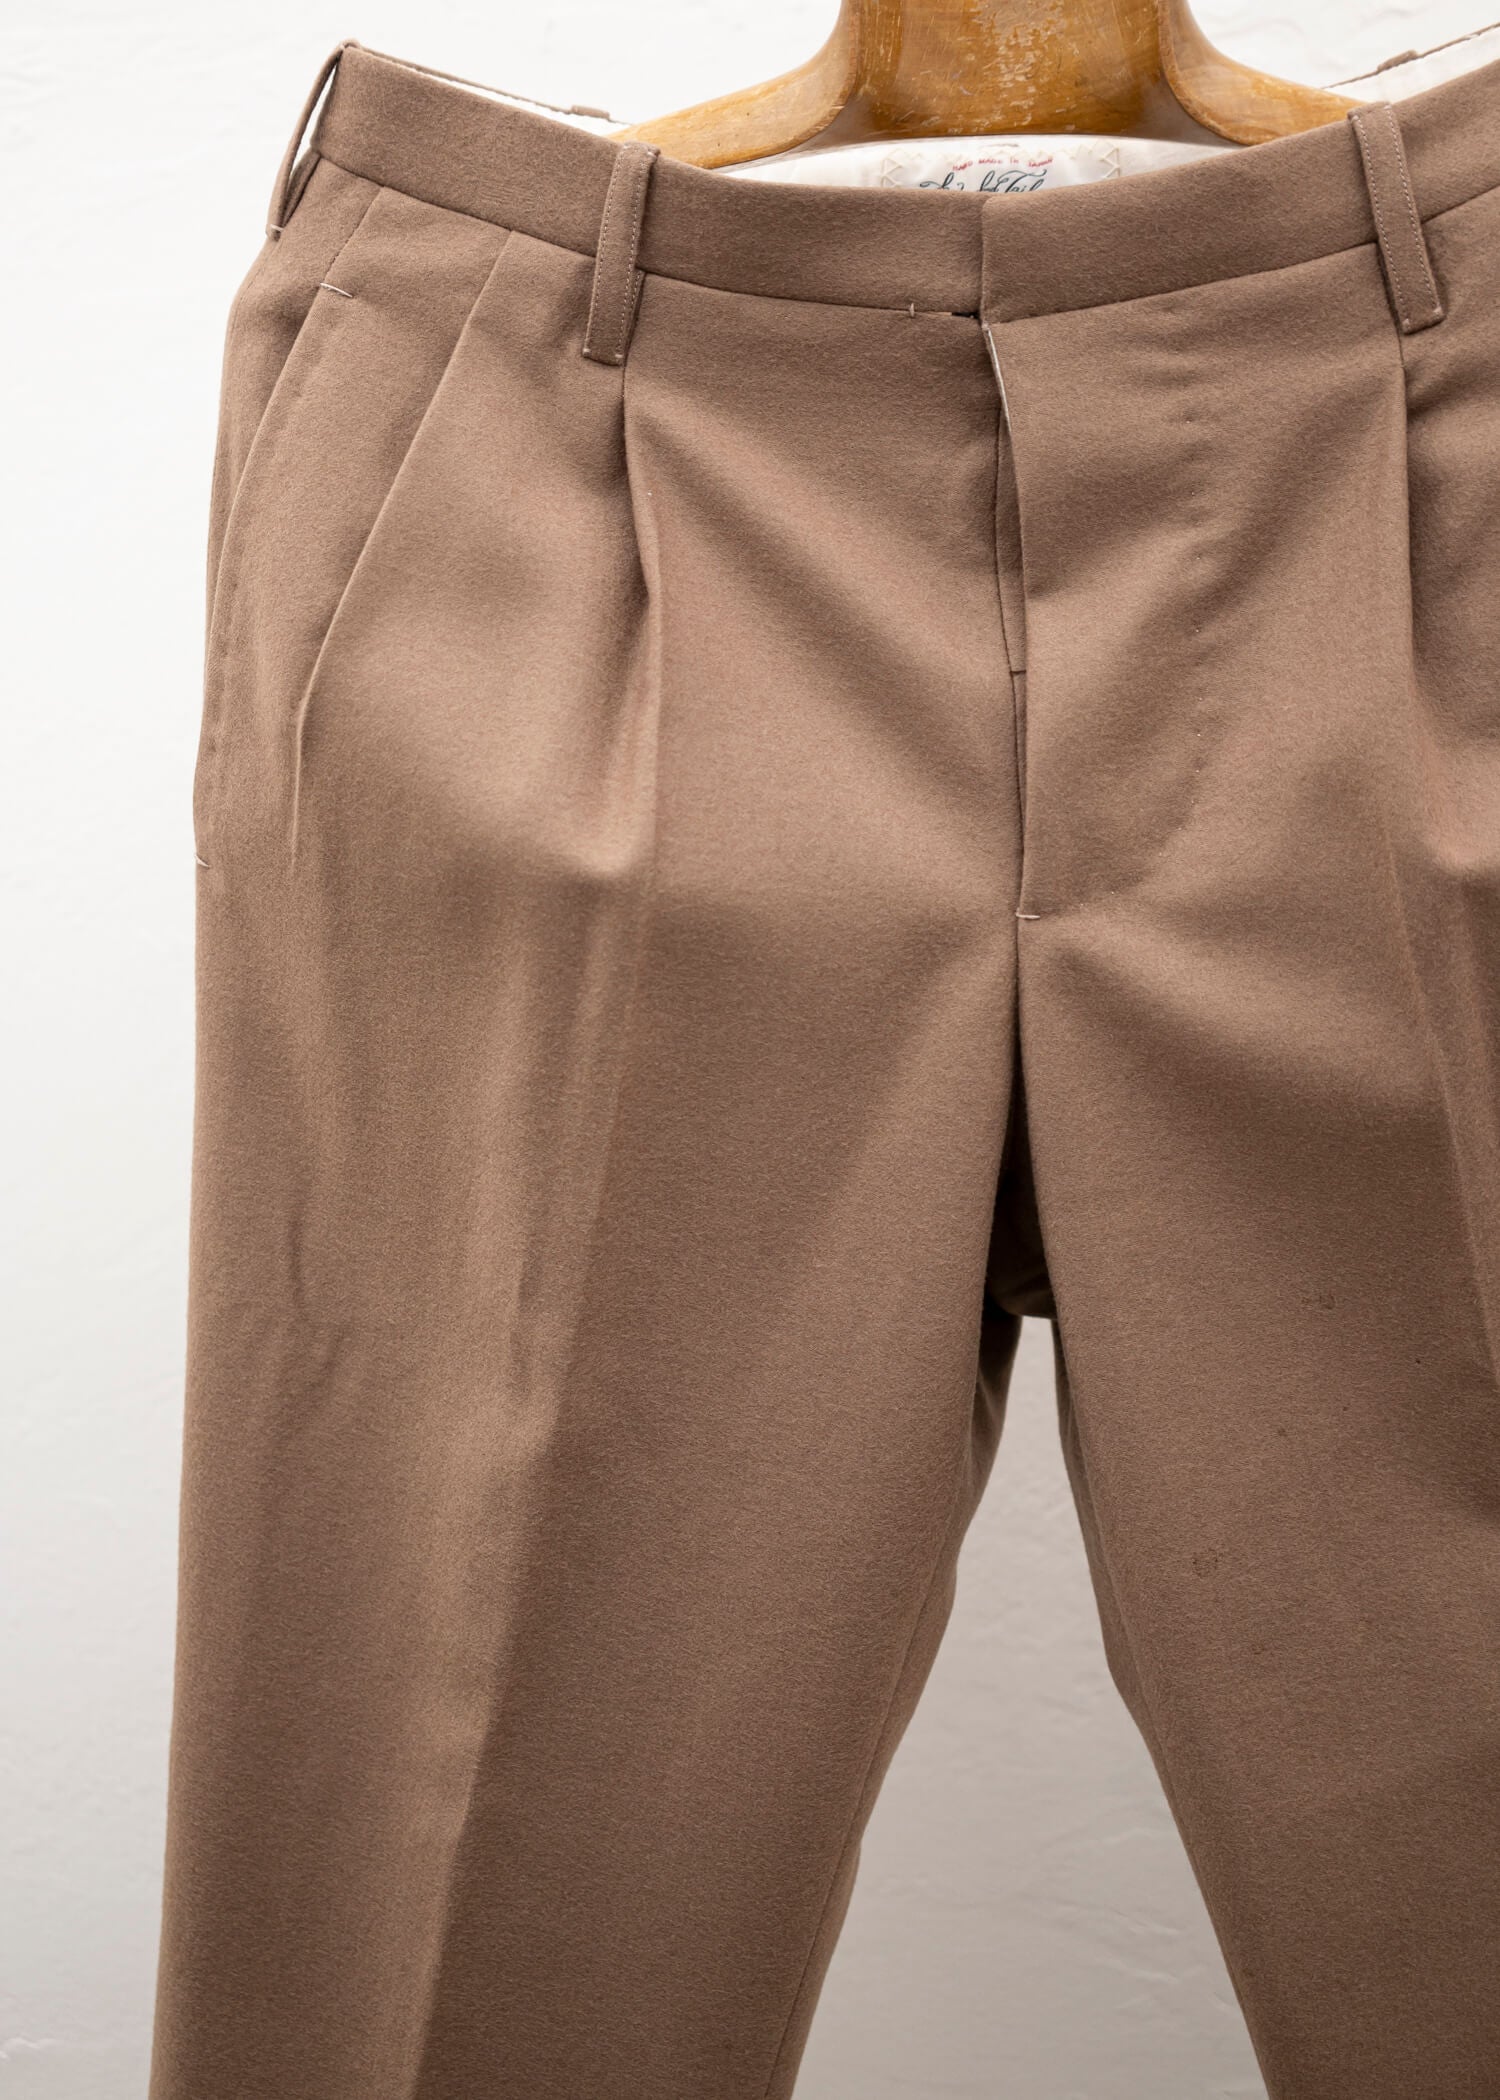 The Crooked Tailor handmade trousers